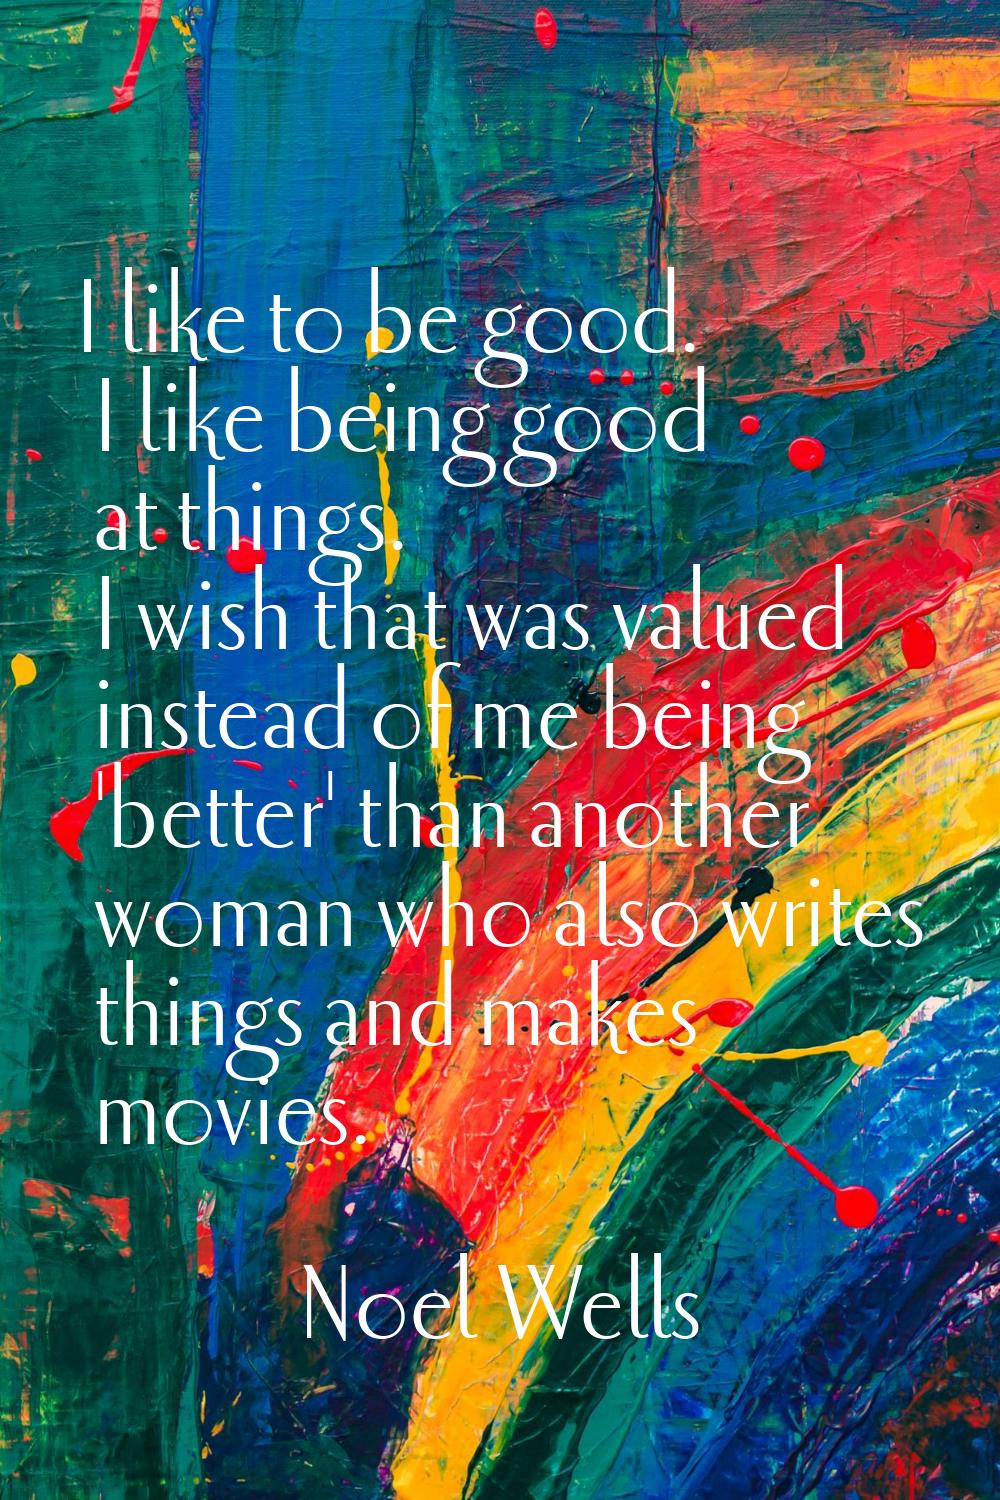 I like to be good. I like being good at things. I wish that was valued instead of me being 'better'